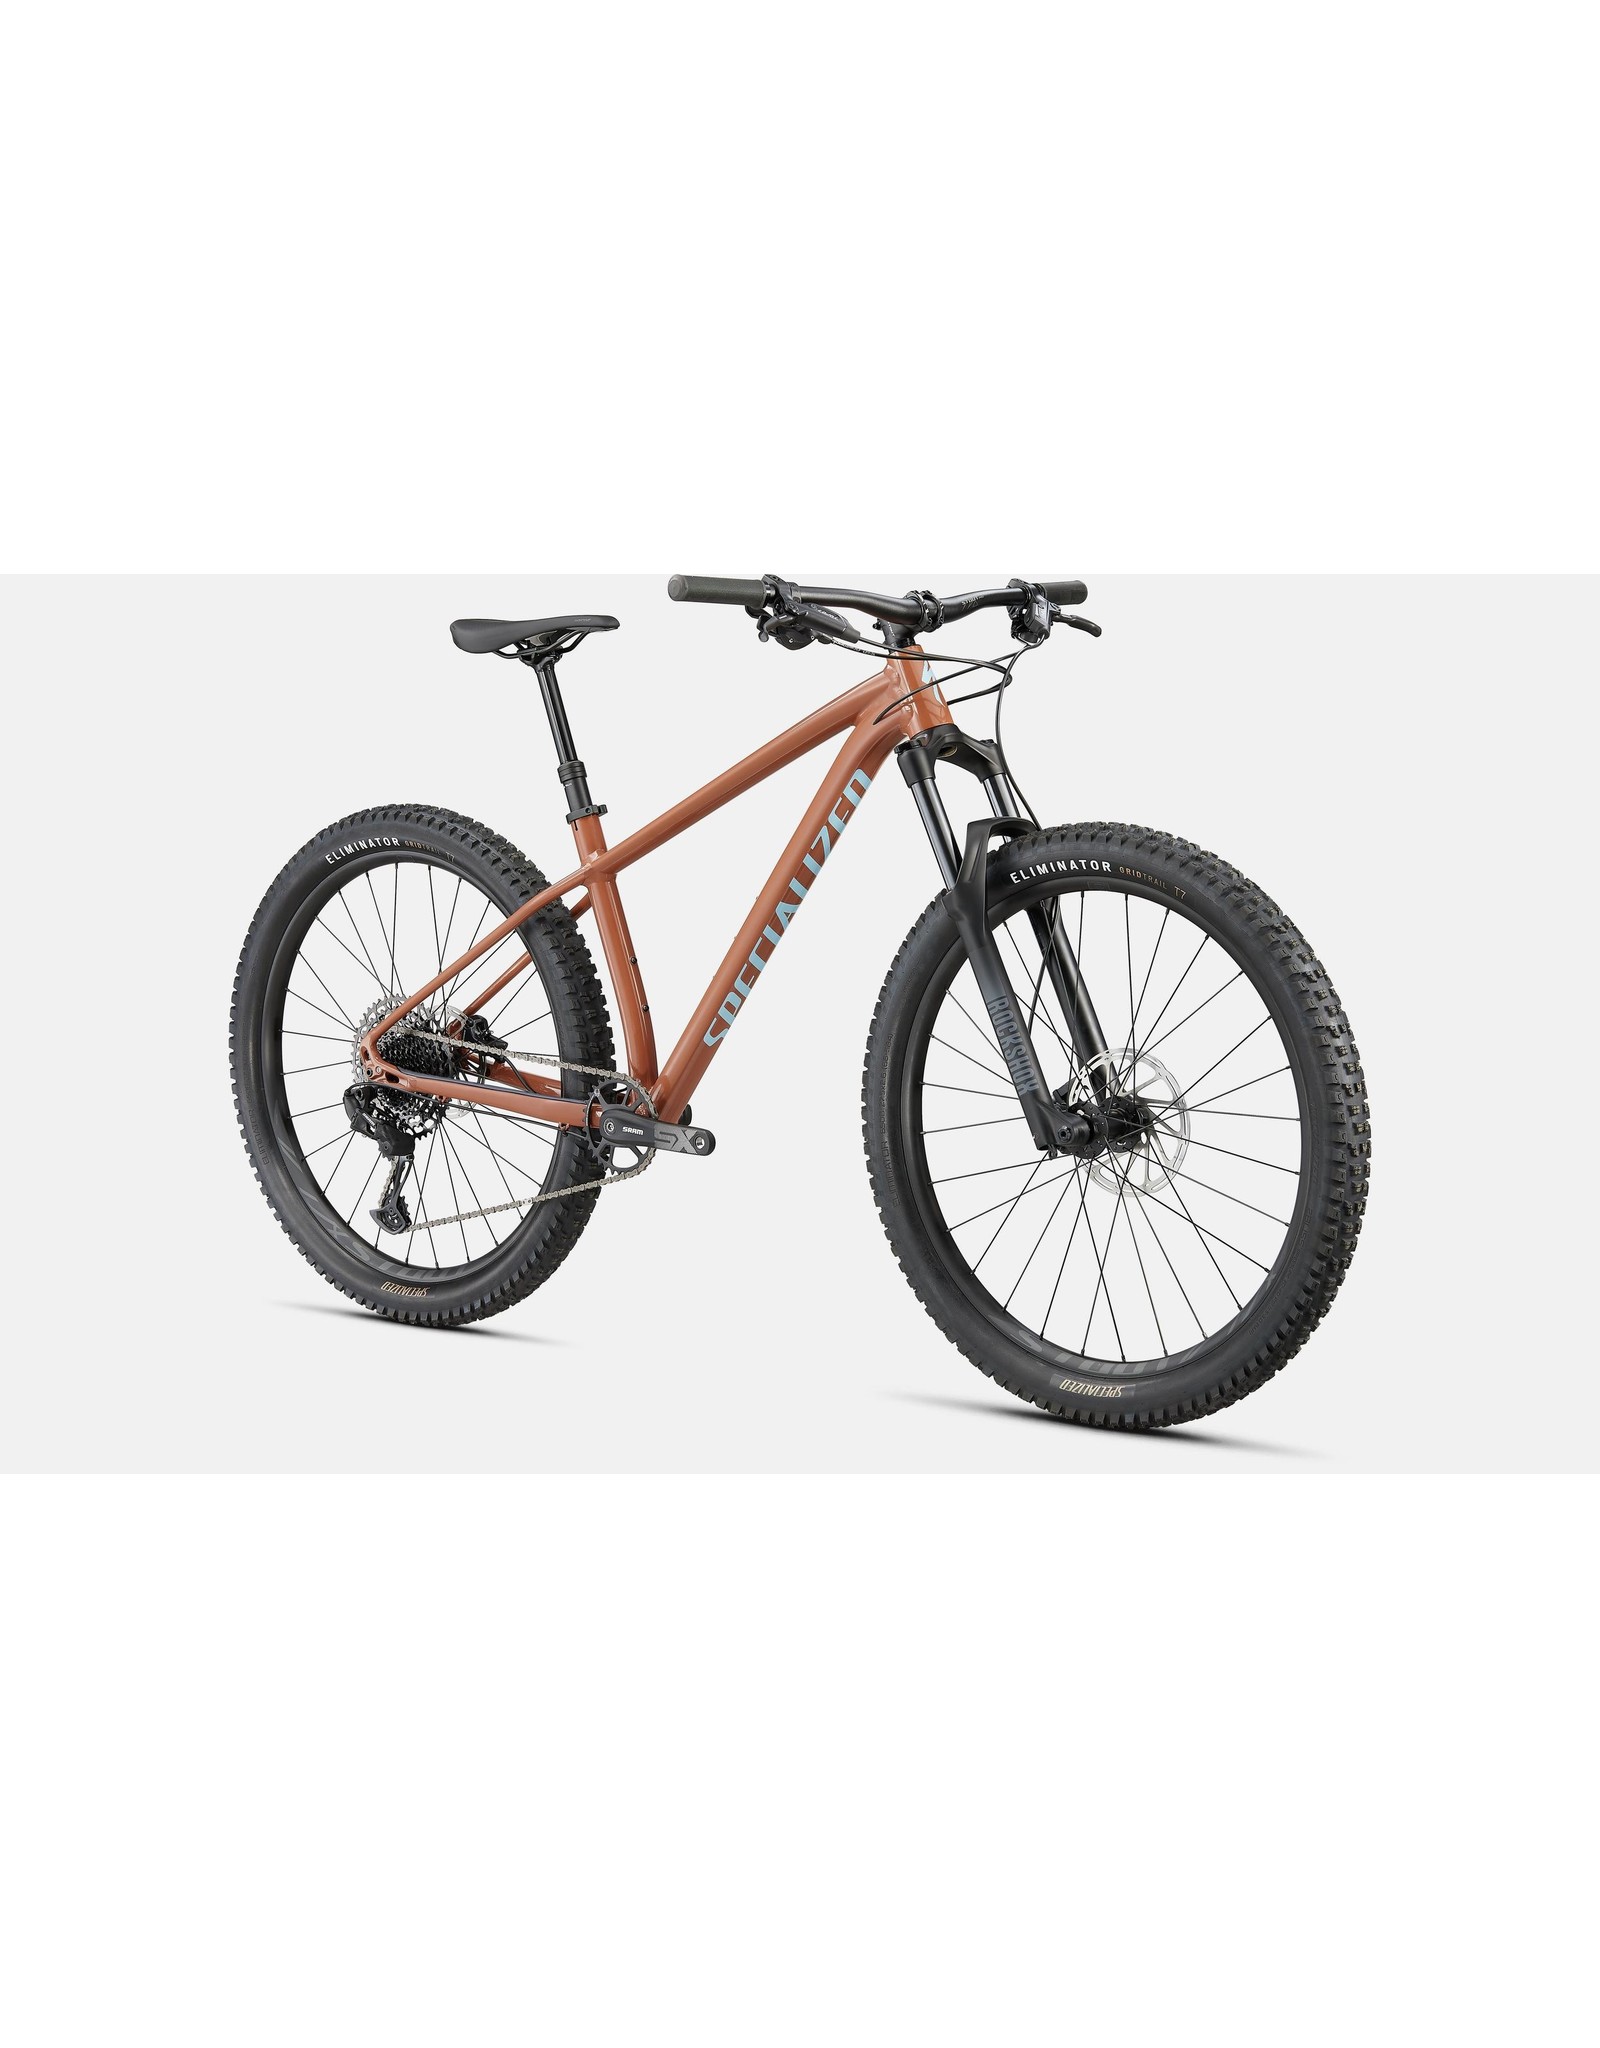 Specialized Fuse Sport 27.5